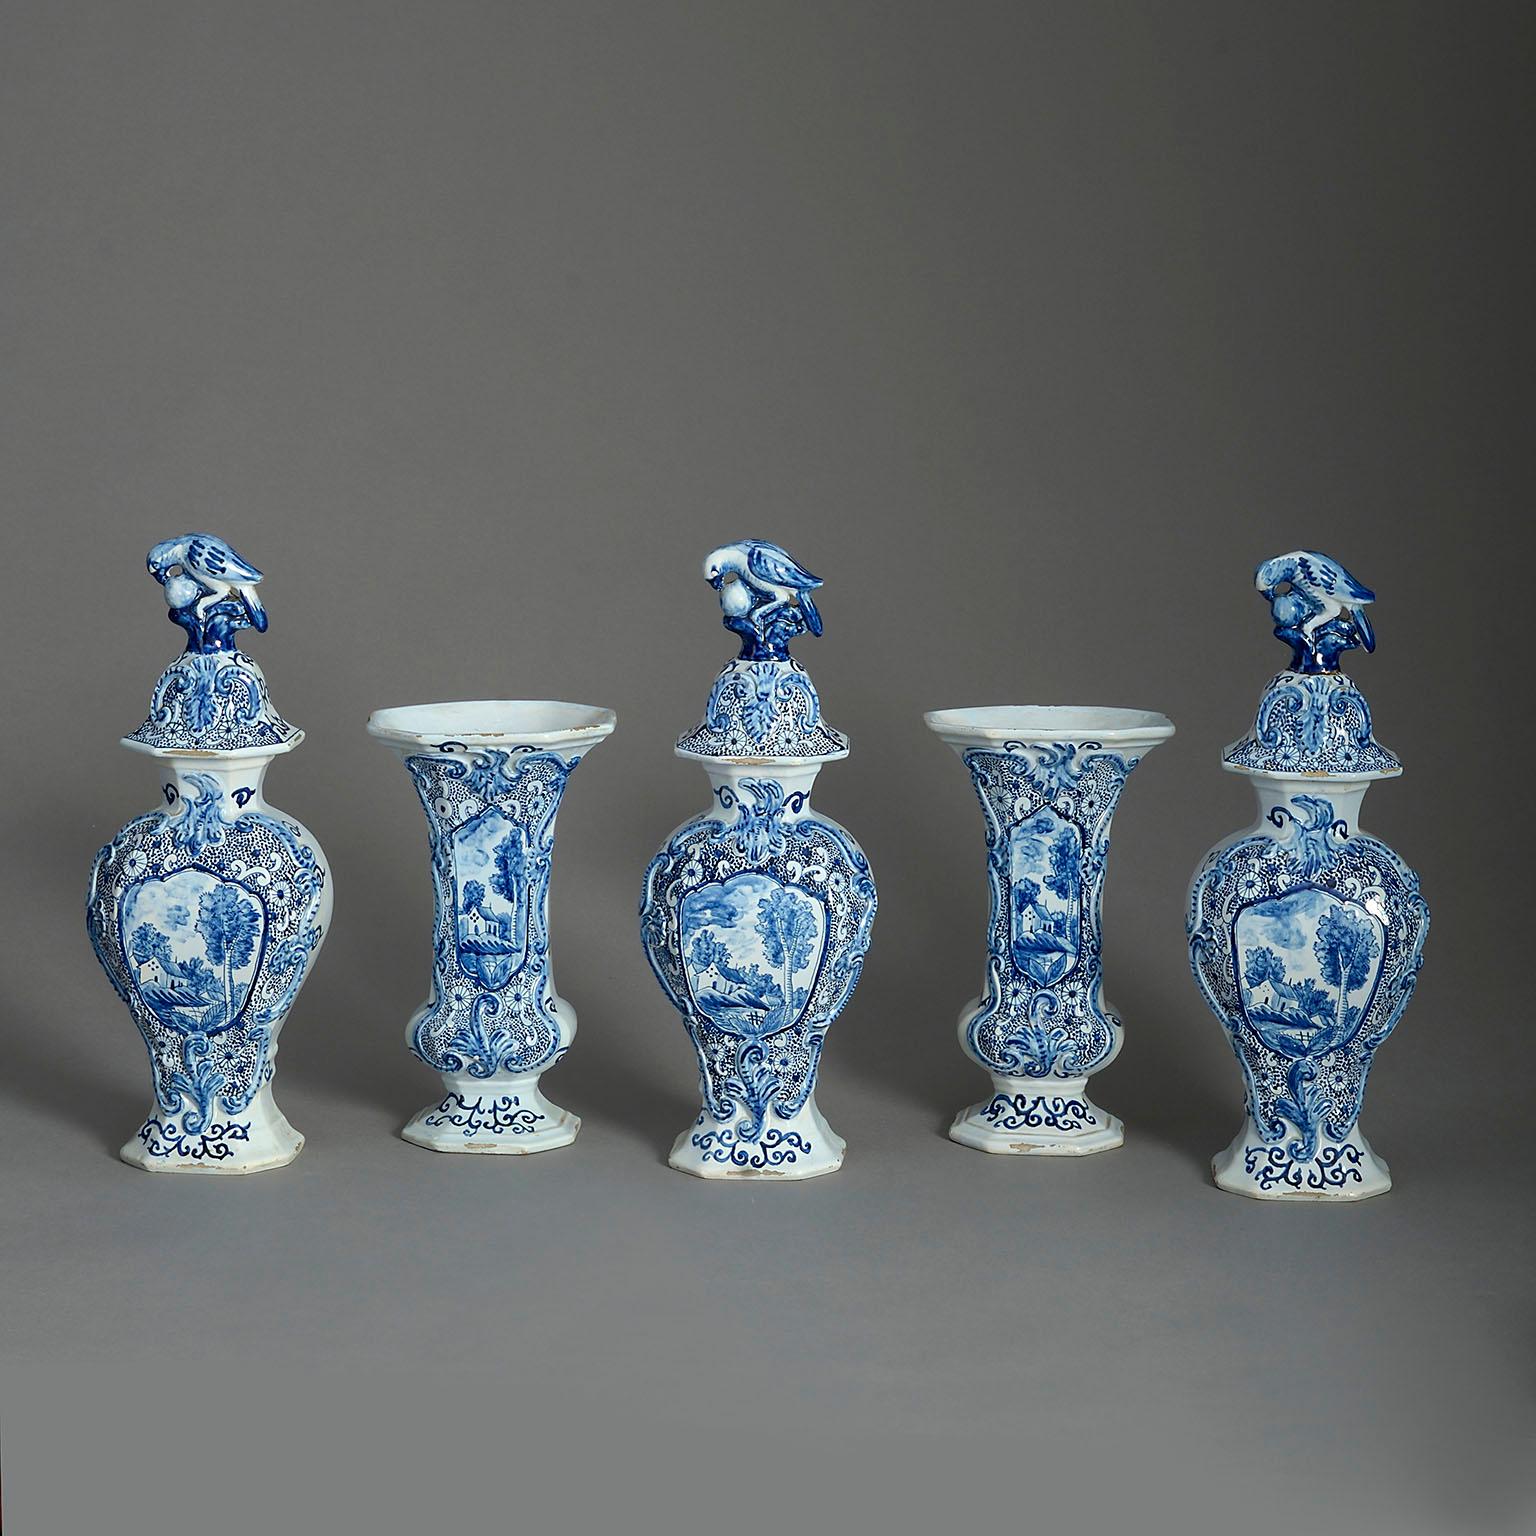 A fine late 19th century garniture of five blue and white glazed Delft pottery vases, each decorated in the Rococo manner with landscape cartouches, scrollwork, three having covers surmounted with a dove. The vases all with makers marks to the